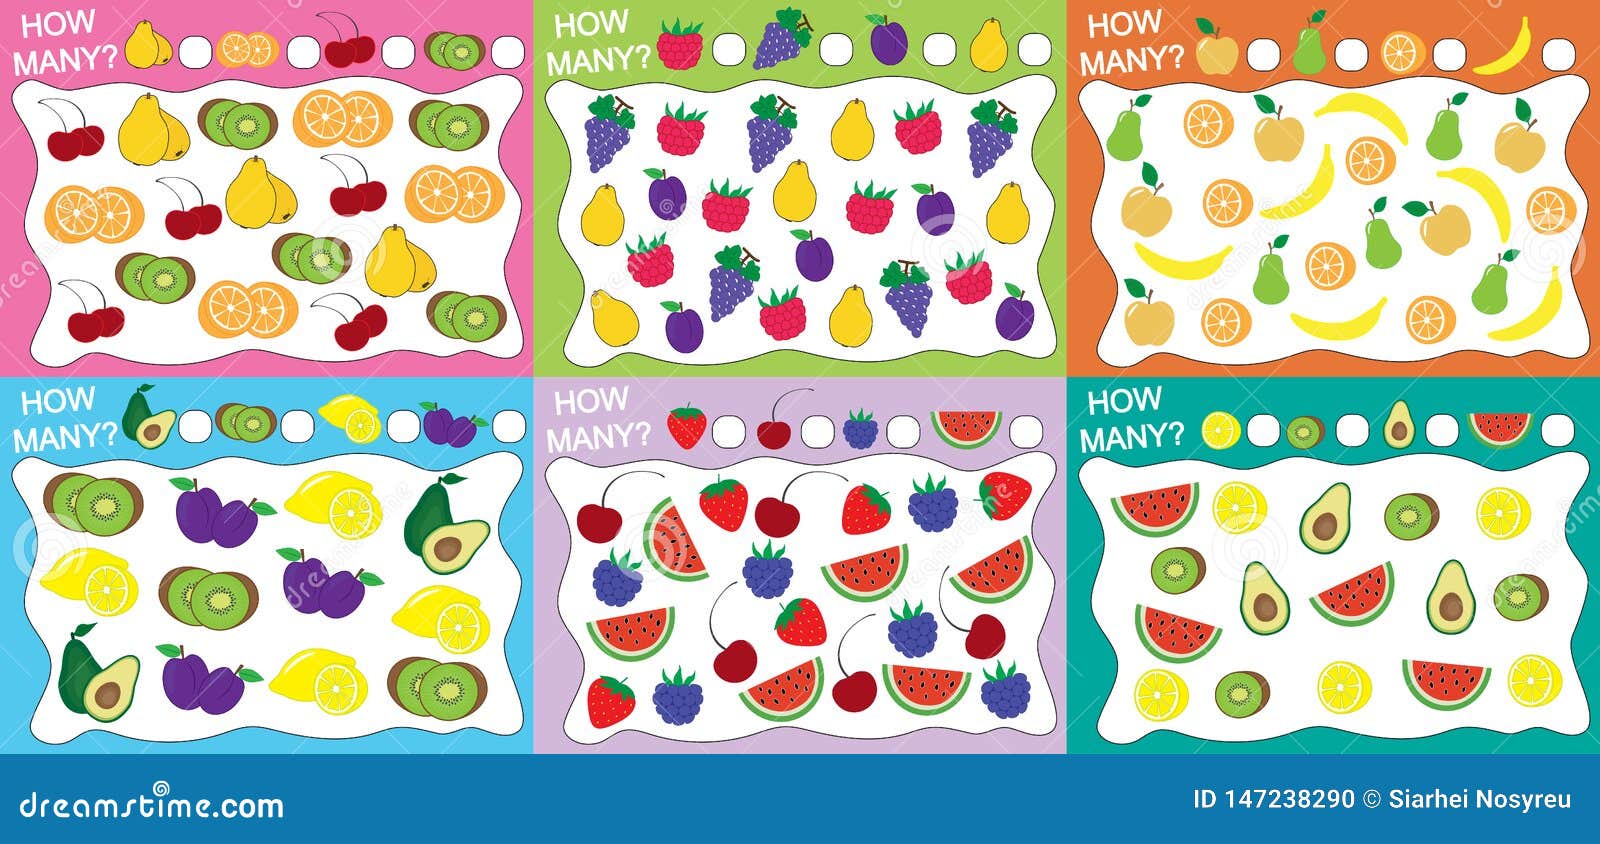 set of educational games for kids 6 in 1. how many objects fruits counted?  